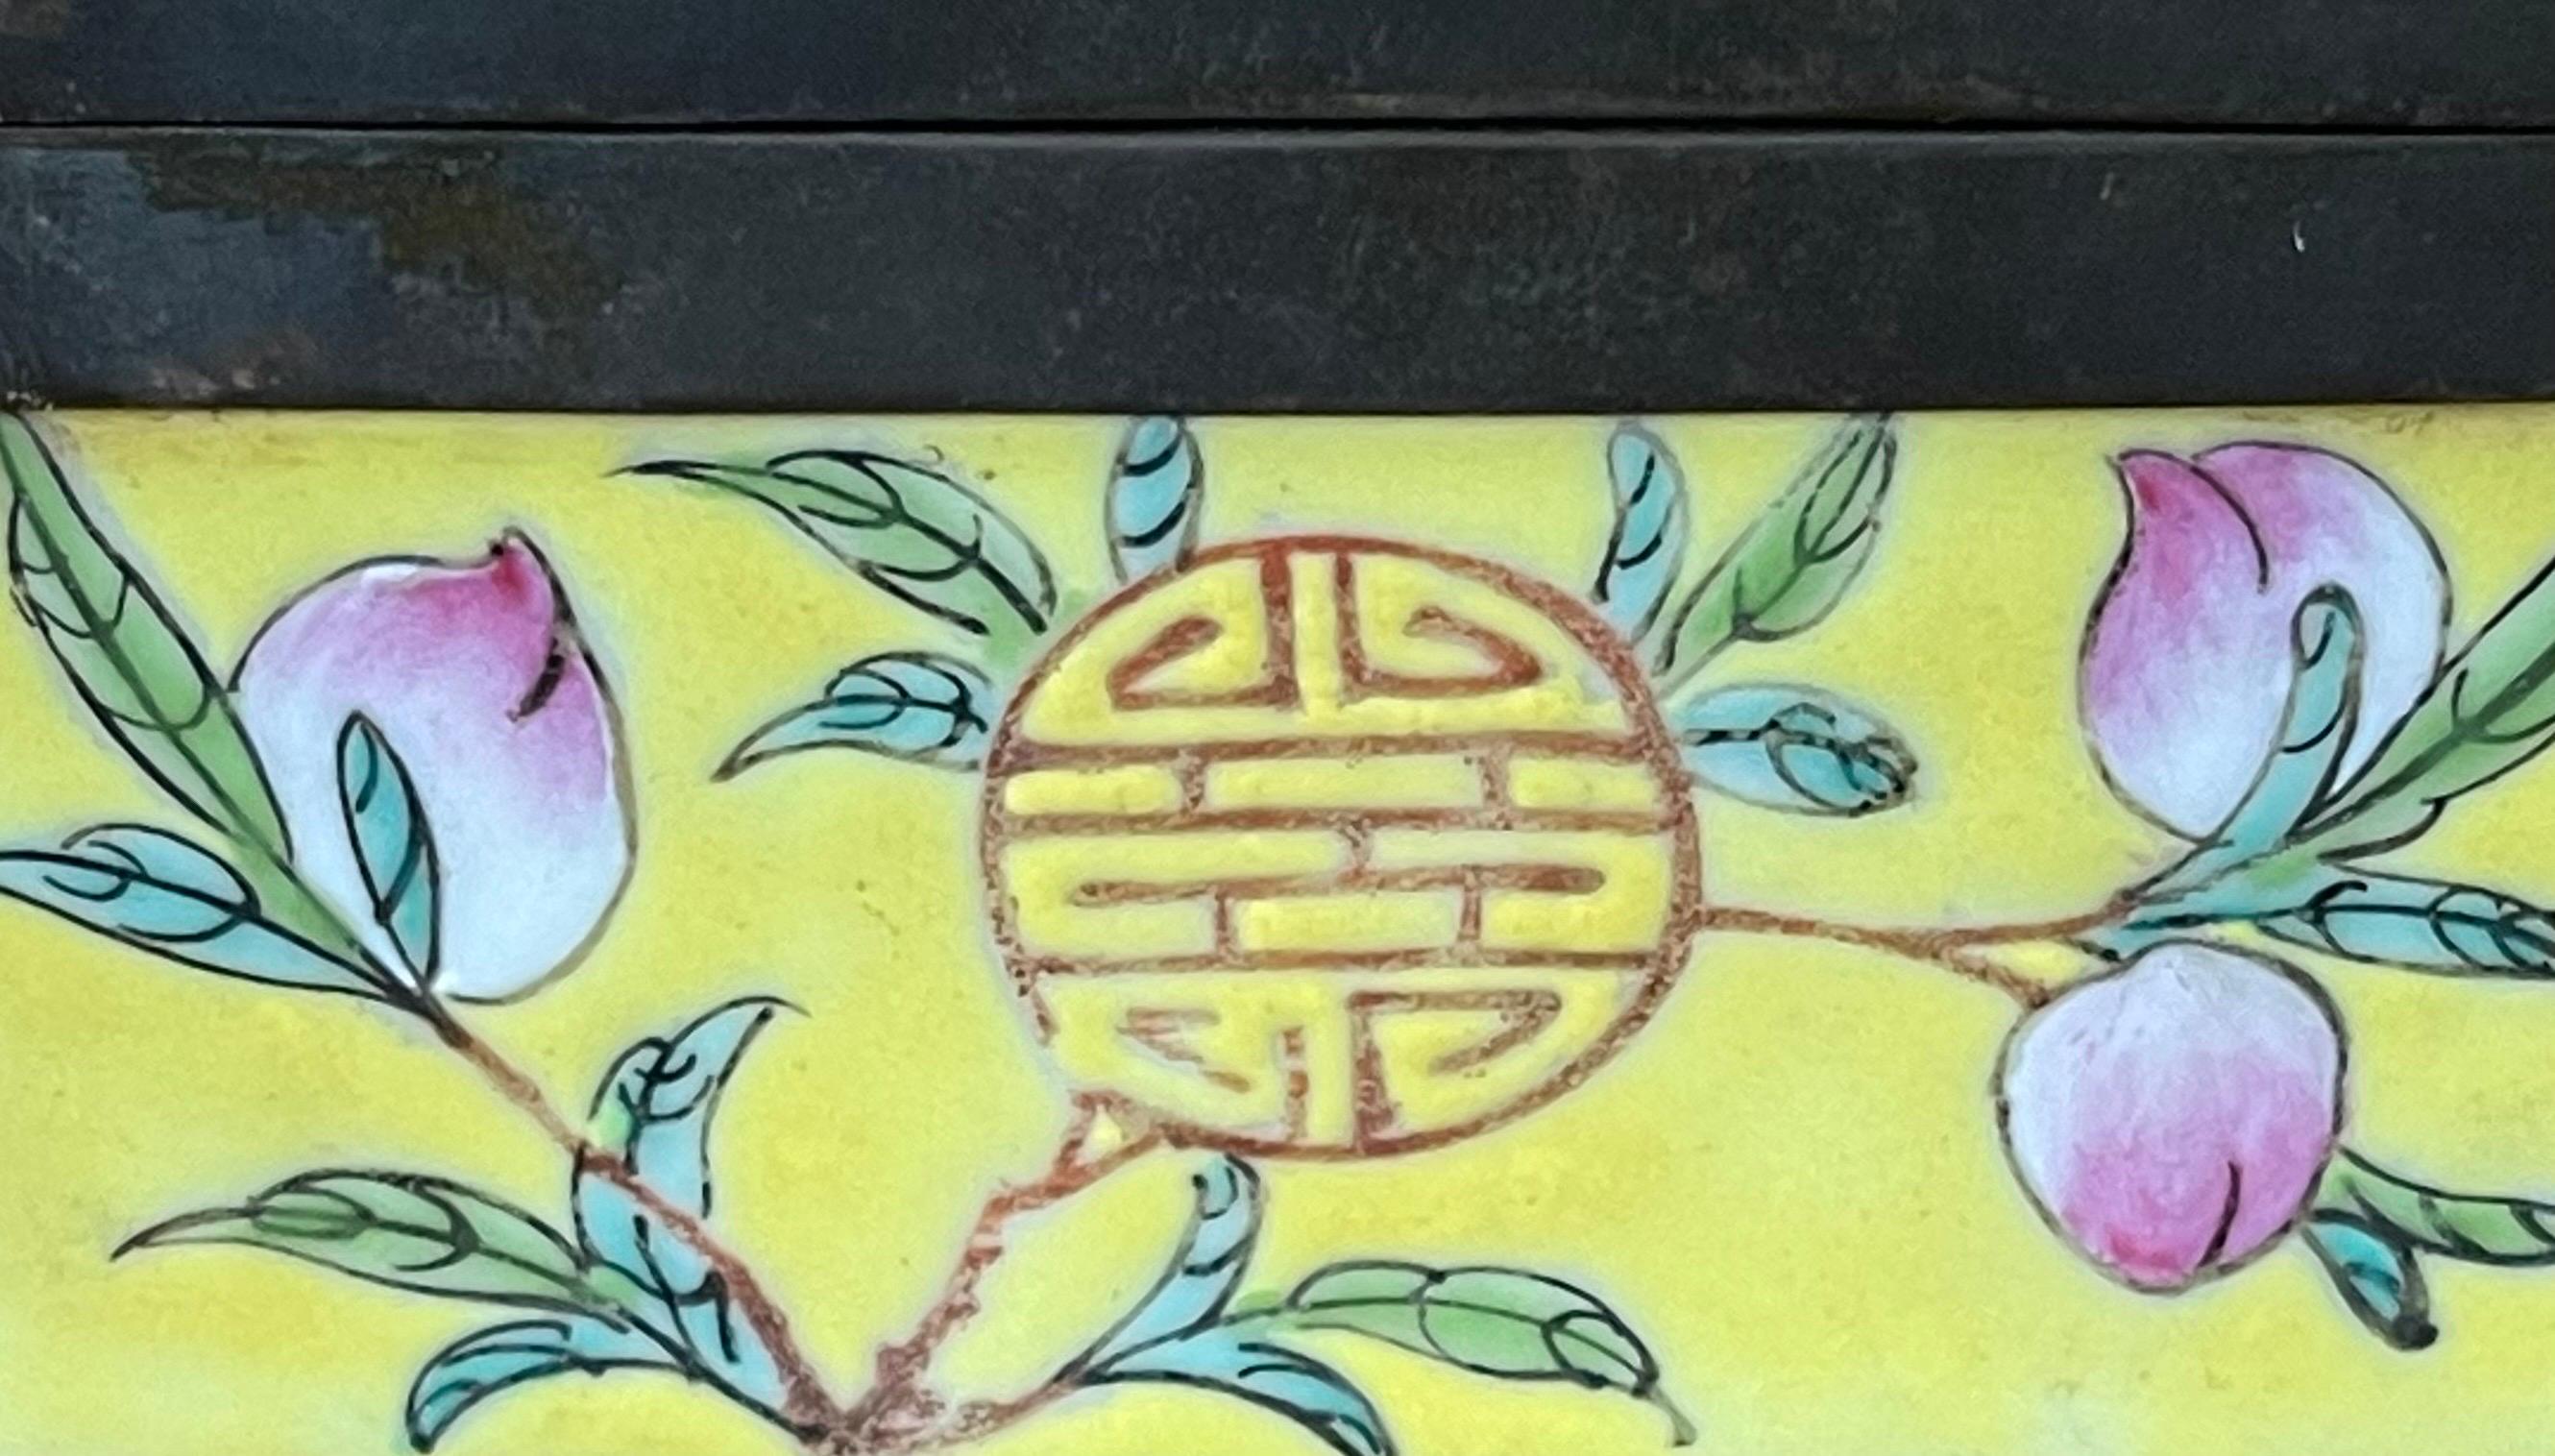 Mid-Century Modern Chinese Hand Painted Ceramic Trinket Box For Sale